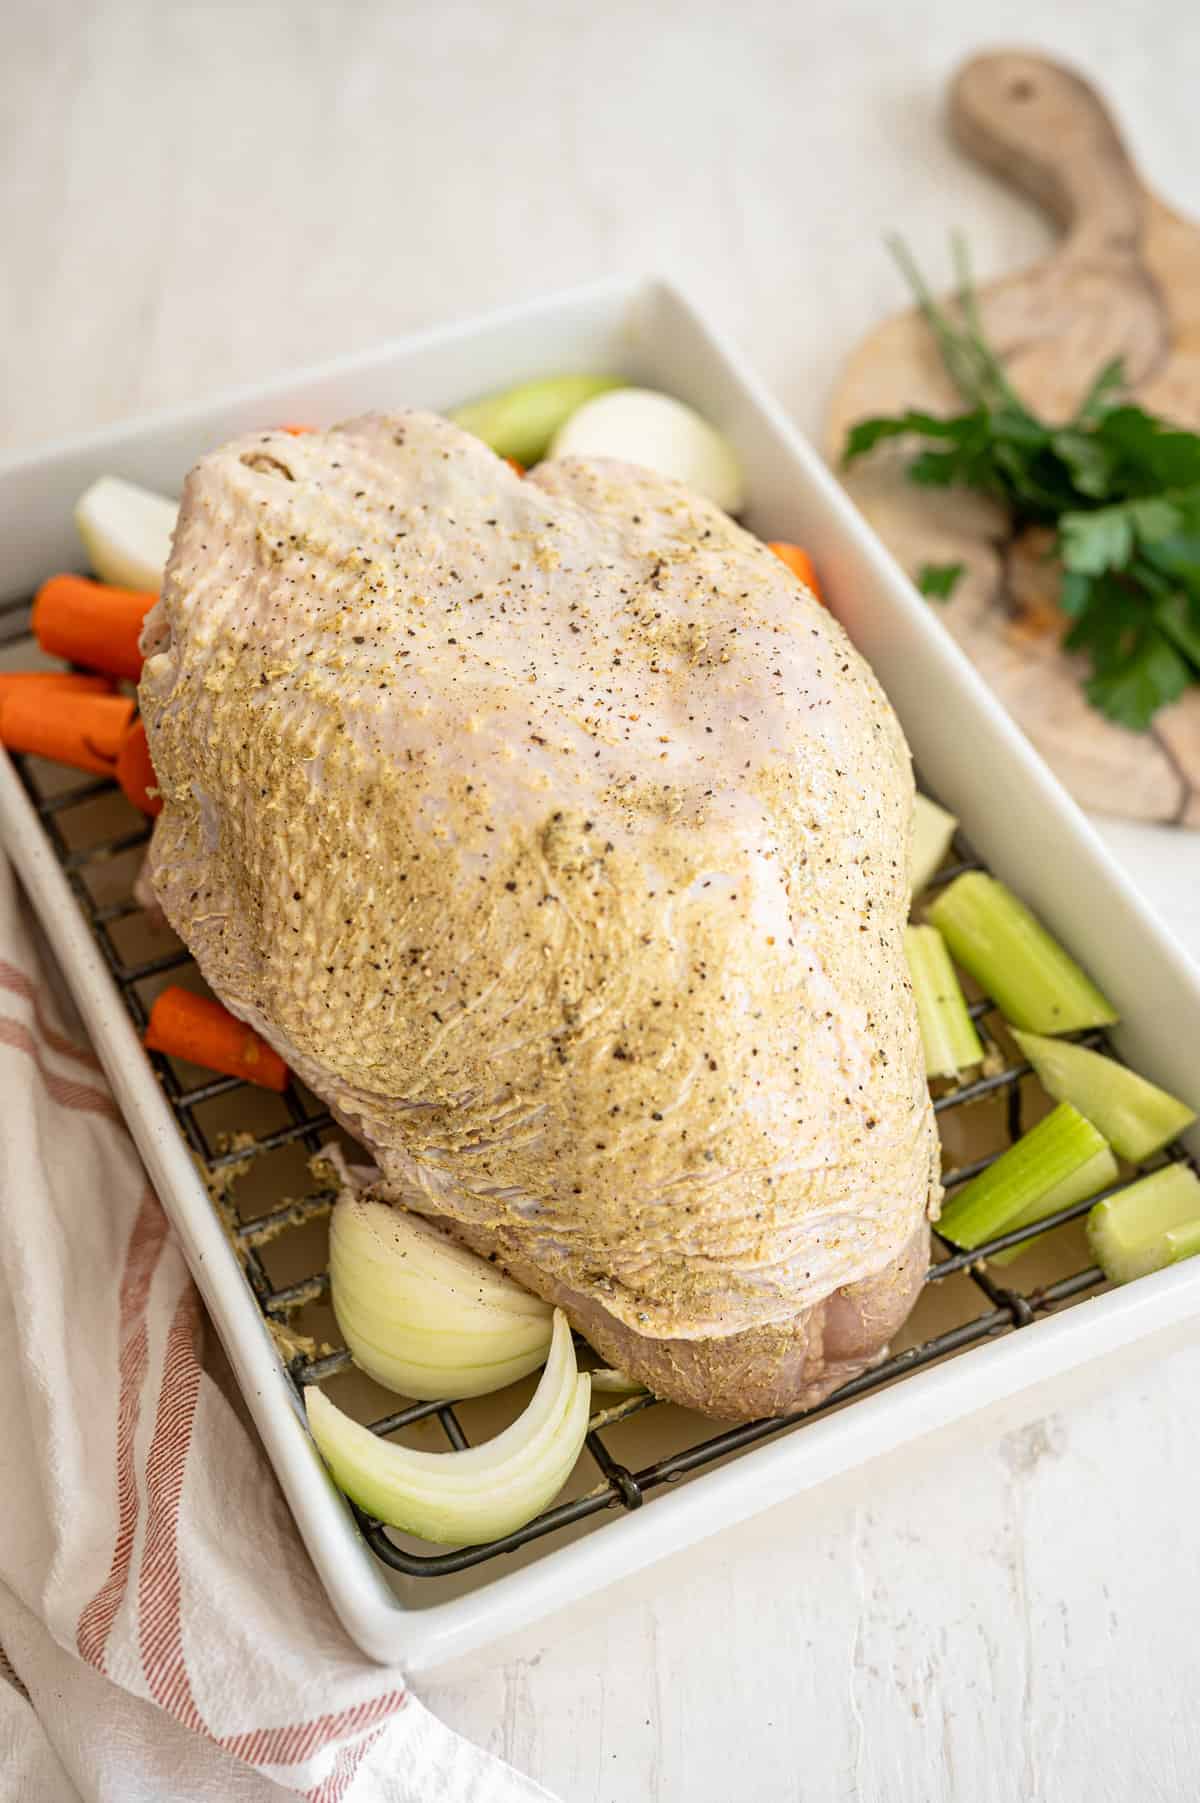 bone-in turkey breast covered in compound butter and stuffed with vegetables